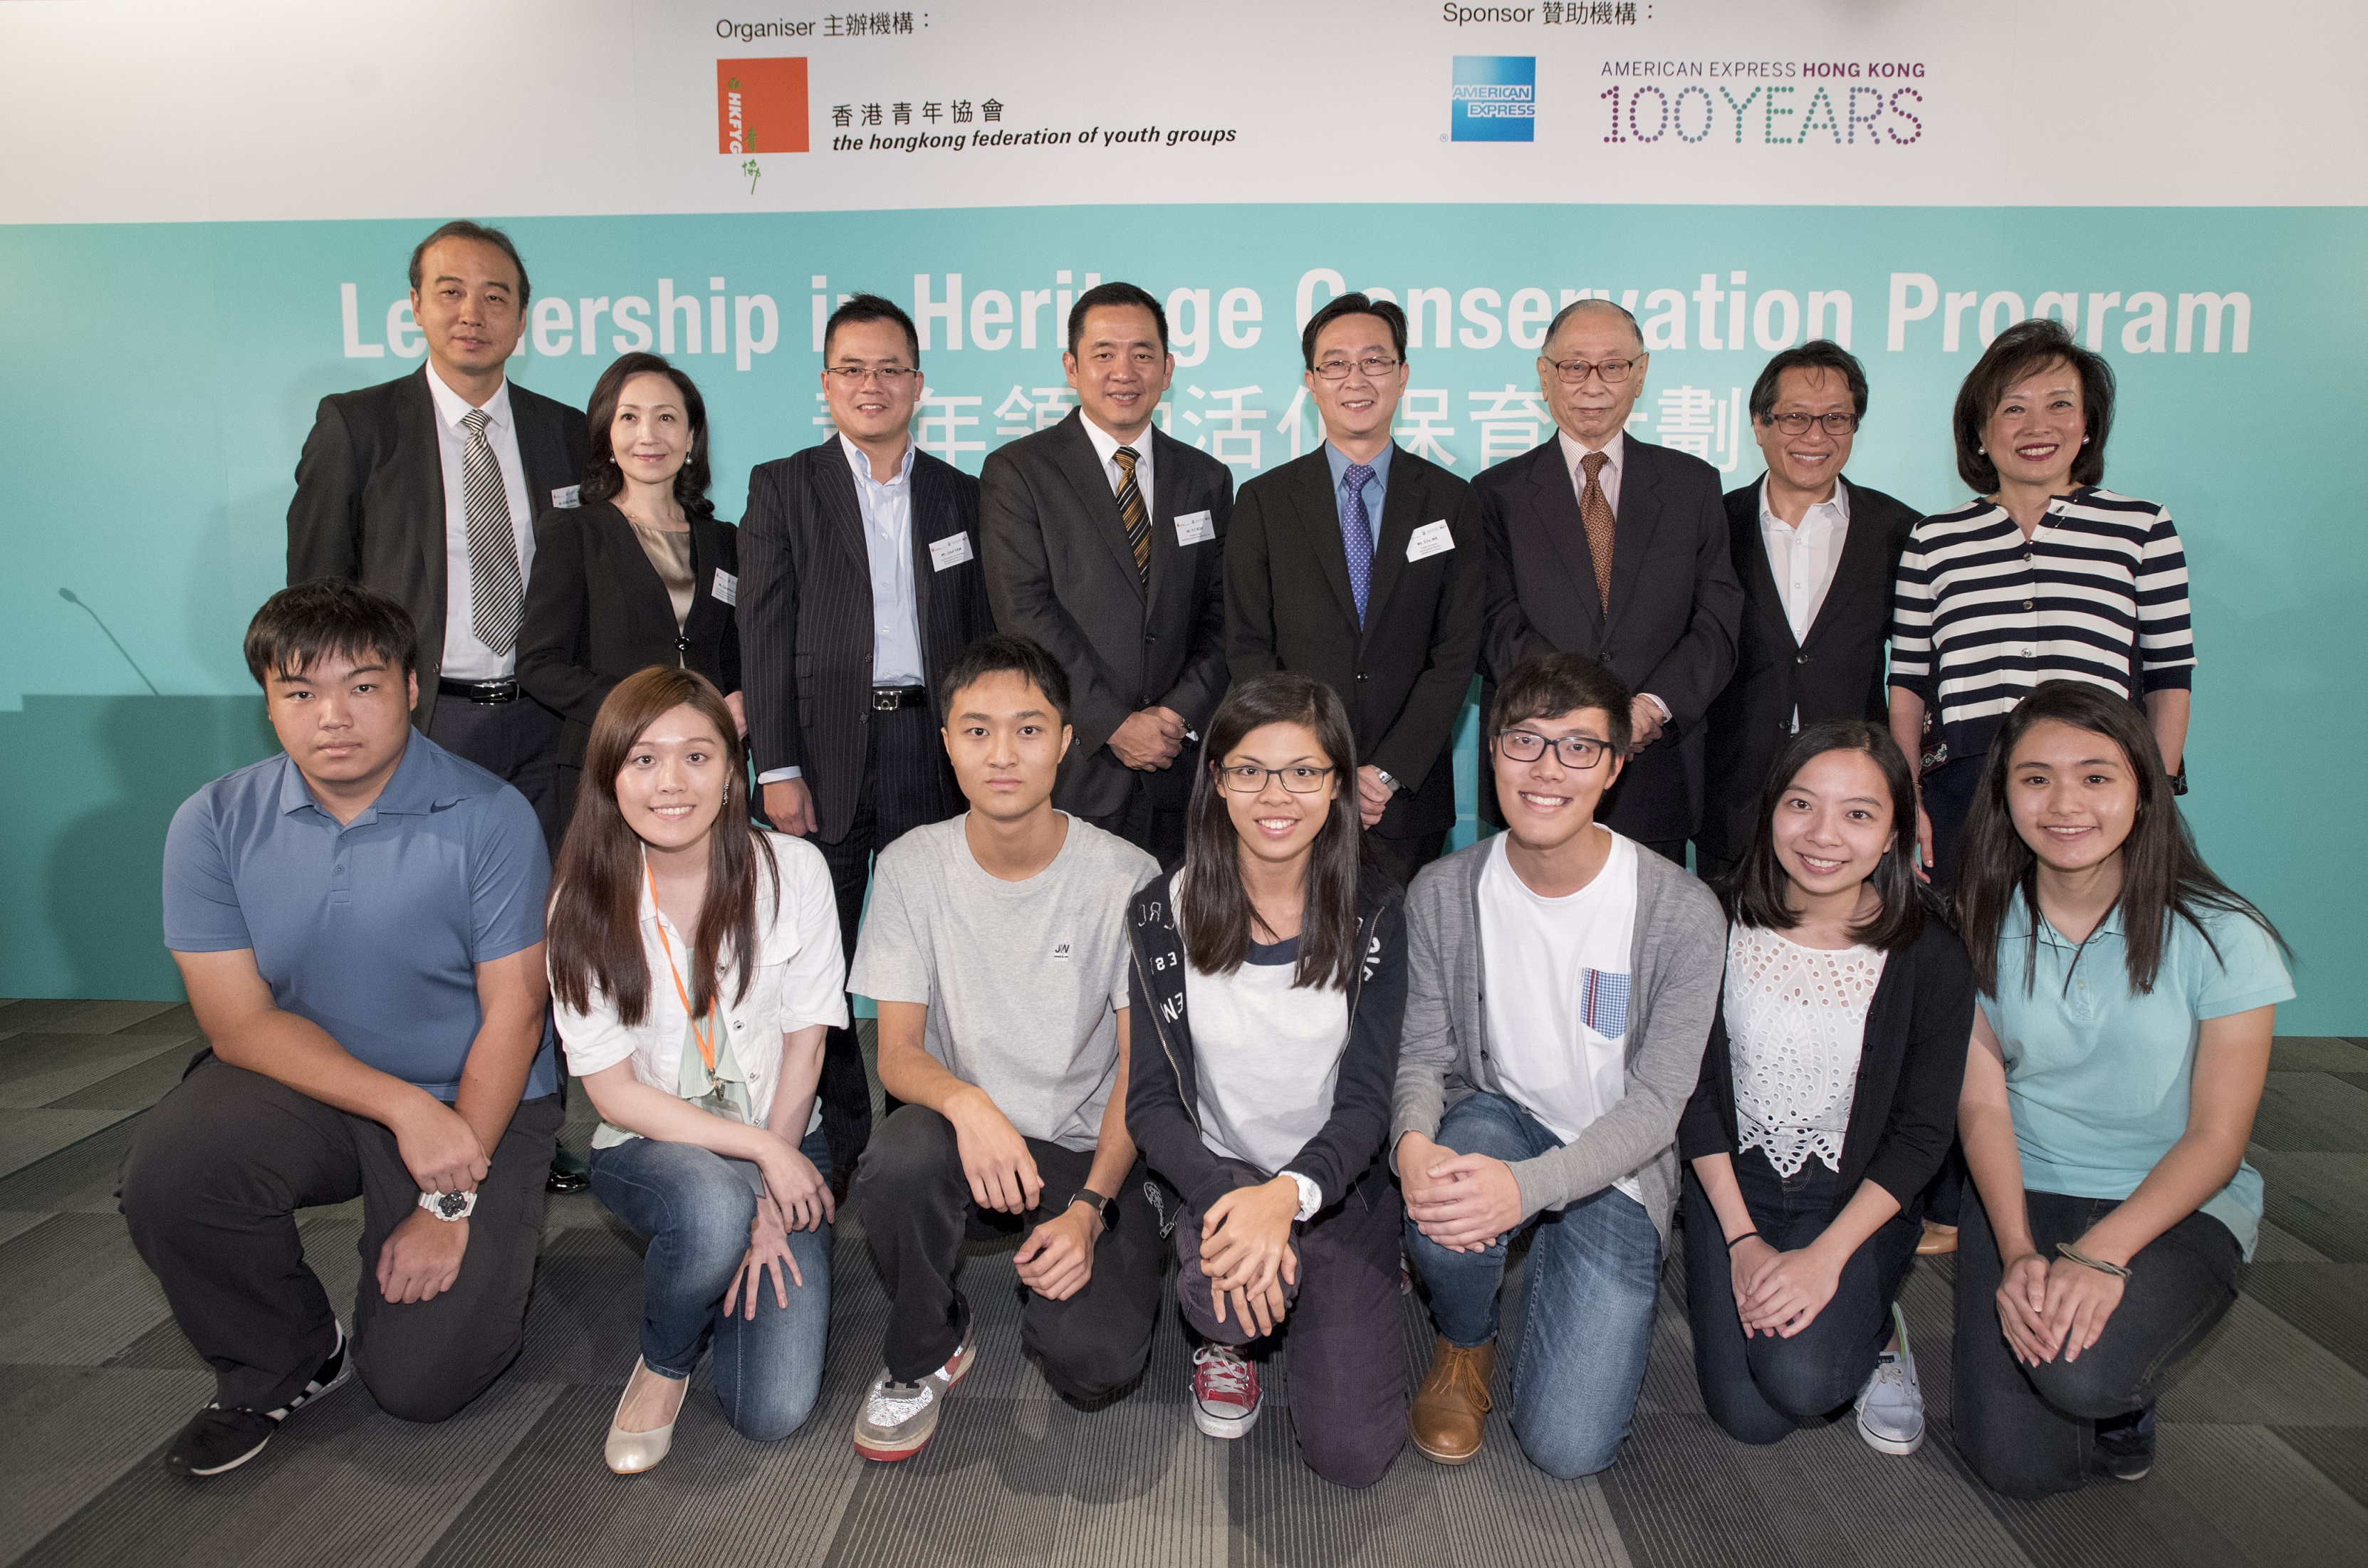 Mr Eric Ma, Undersecretary for Development (fourth from right) and Dr Rosanna Wong, HKFYG (first from right) joined Mr Y C Koh (fourth from left) and Ms Susanna Lee (second from left) from American Express to announce American Express’ sponsorship. They were joined by Sir T L Yang, former Chief of Justice (third from right); Mr Jose Yam, Commissioner for Heritage (third from left); Dr Lee Ho Yin from HKU (second from right) and Mr Ricky Wong from the Commissioner for Heritage’s Office (first from left).